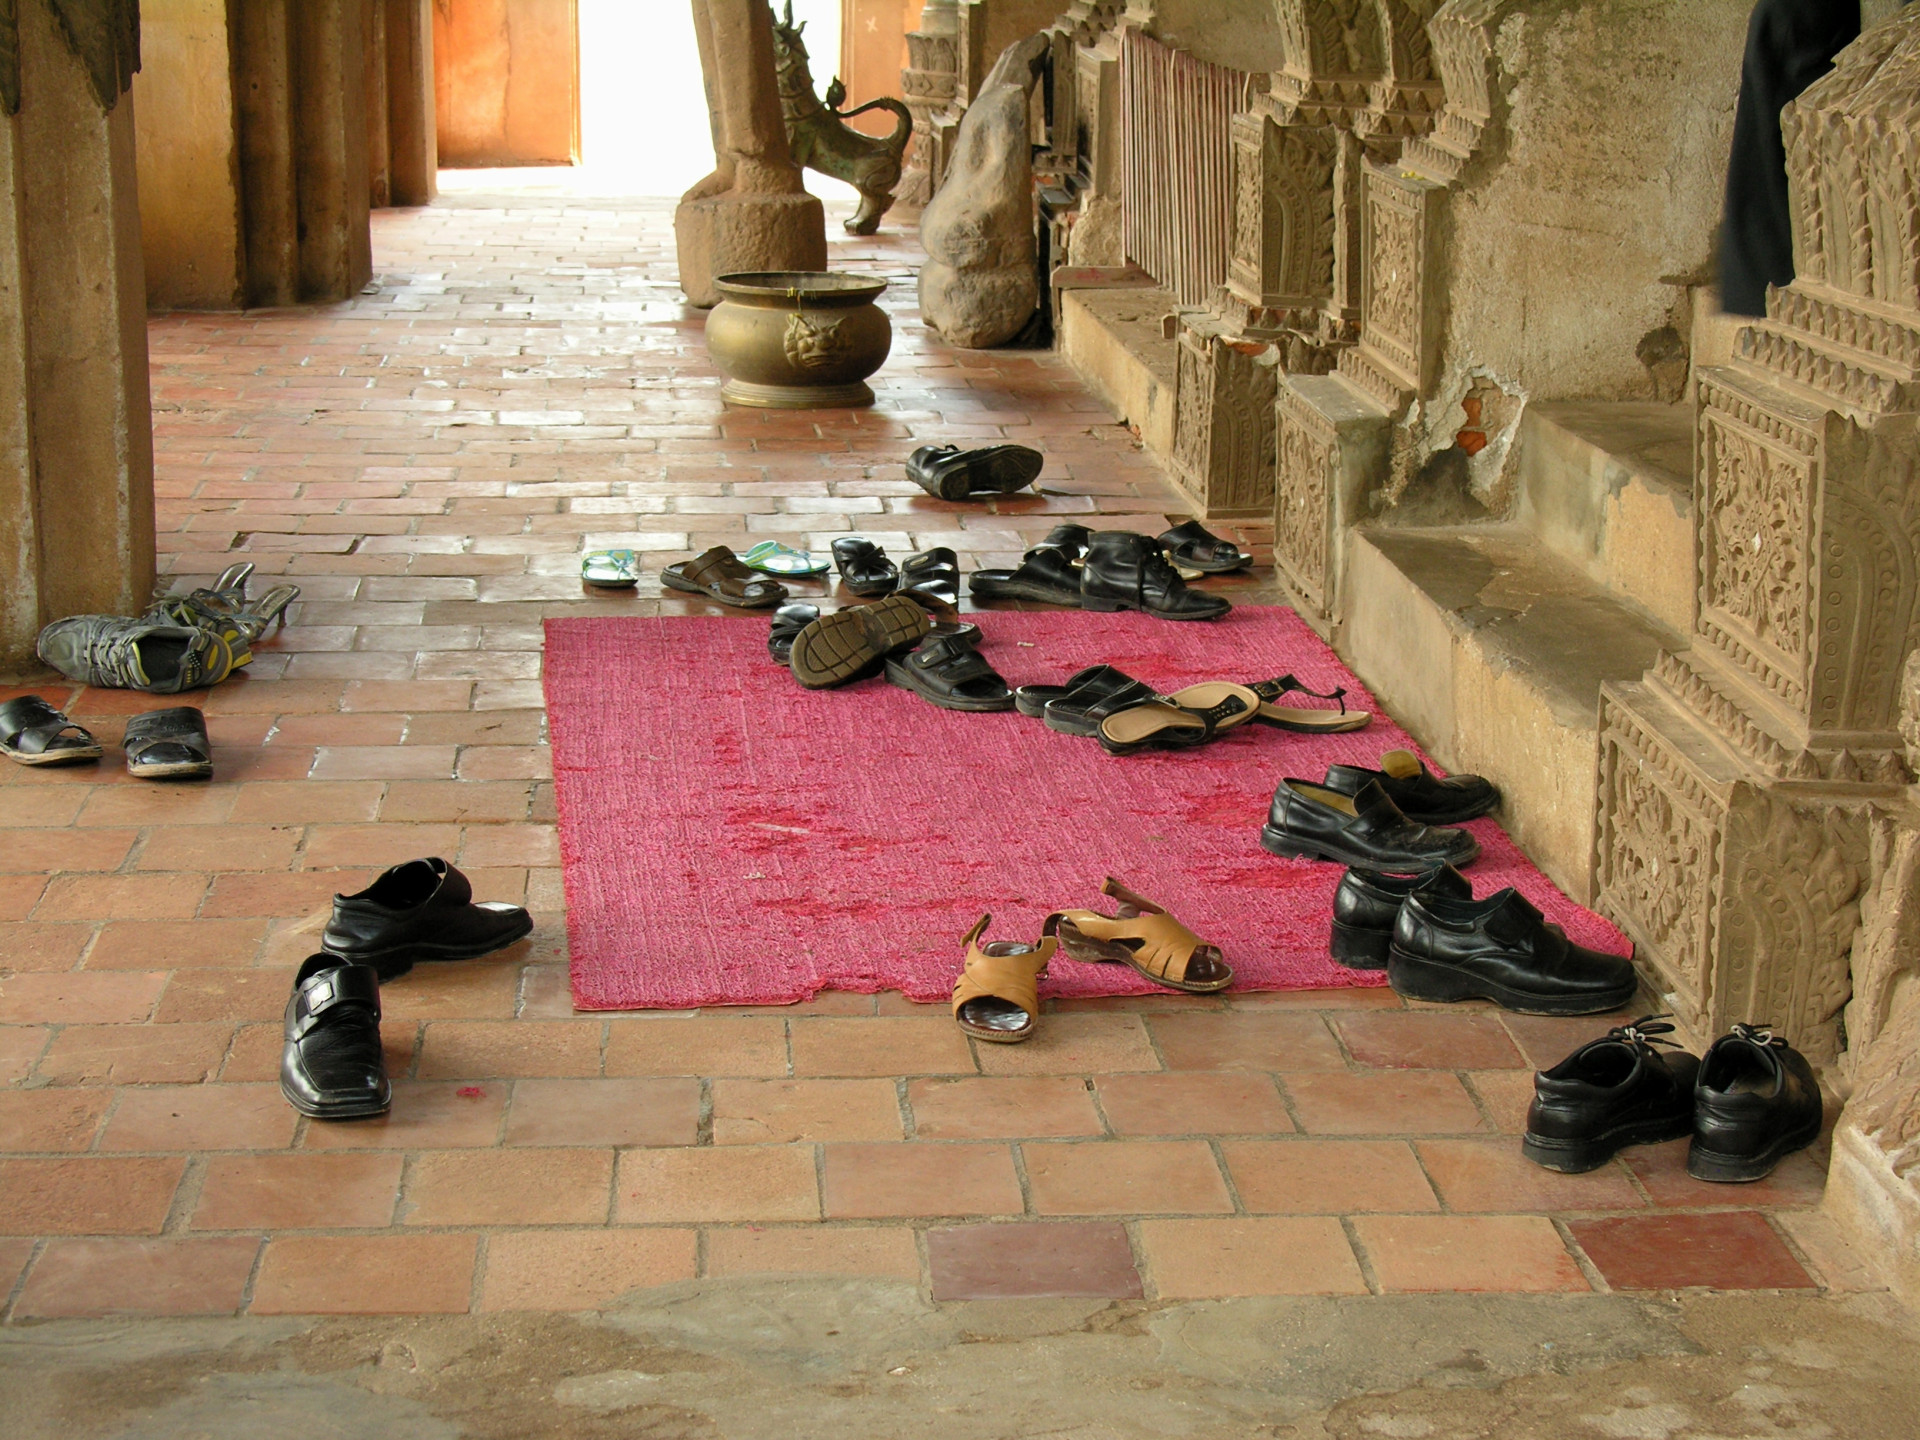 Some countries, especially in Asia, take their shoes off at the entrance to a house, temple, or sacred place. If you visit a country where this is the norm, respect the tradition and do as the locals do.<p><a href="https://www.msn.com/en-us/community/channel/vid-7xx8mnucu55yw63we9va2gwr7uihbxwc68fxqp25x6tg4ftibpra?cvid=94631541bc0f4f89bfd59158d696ad7e">Follow us and access great exclusive content every day</a></p>